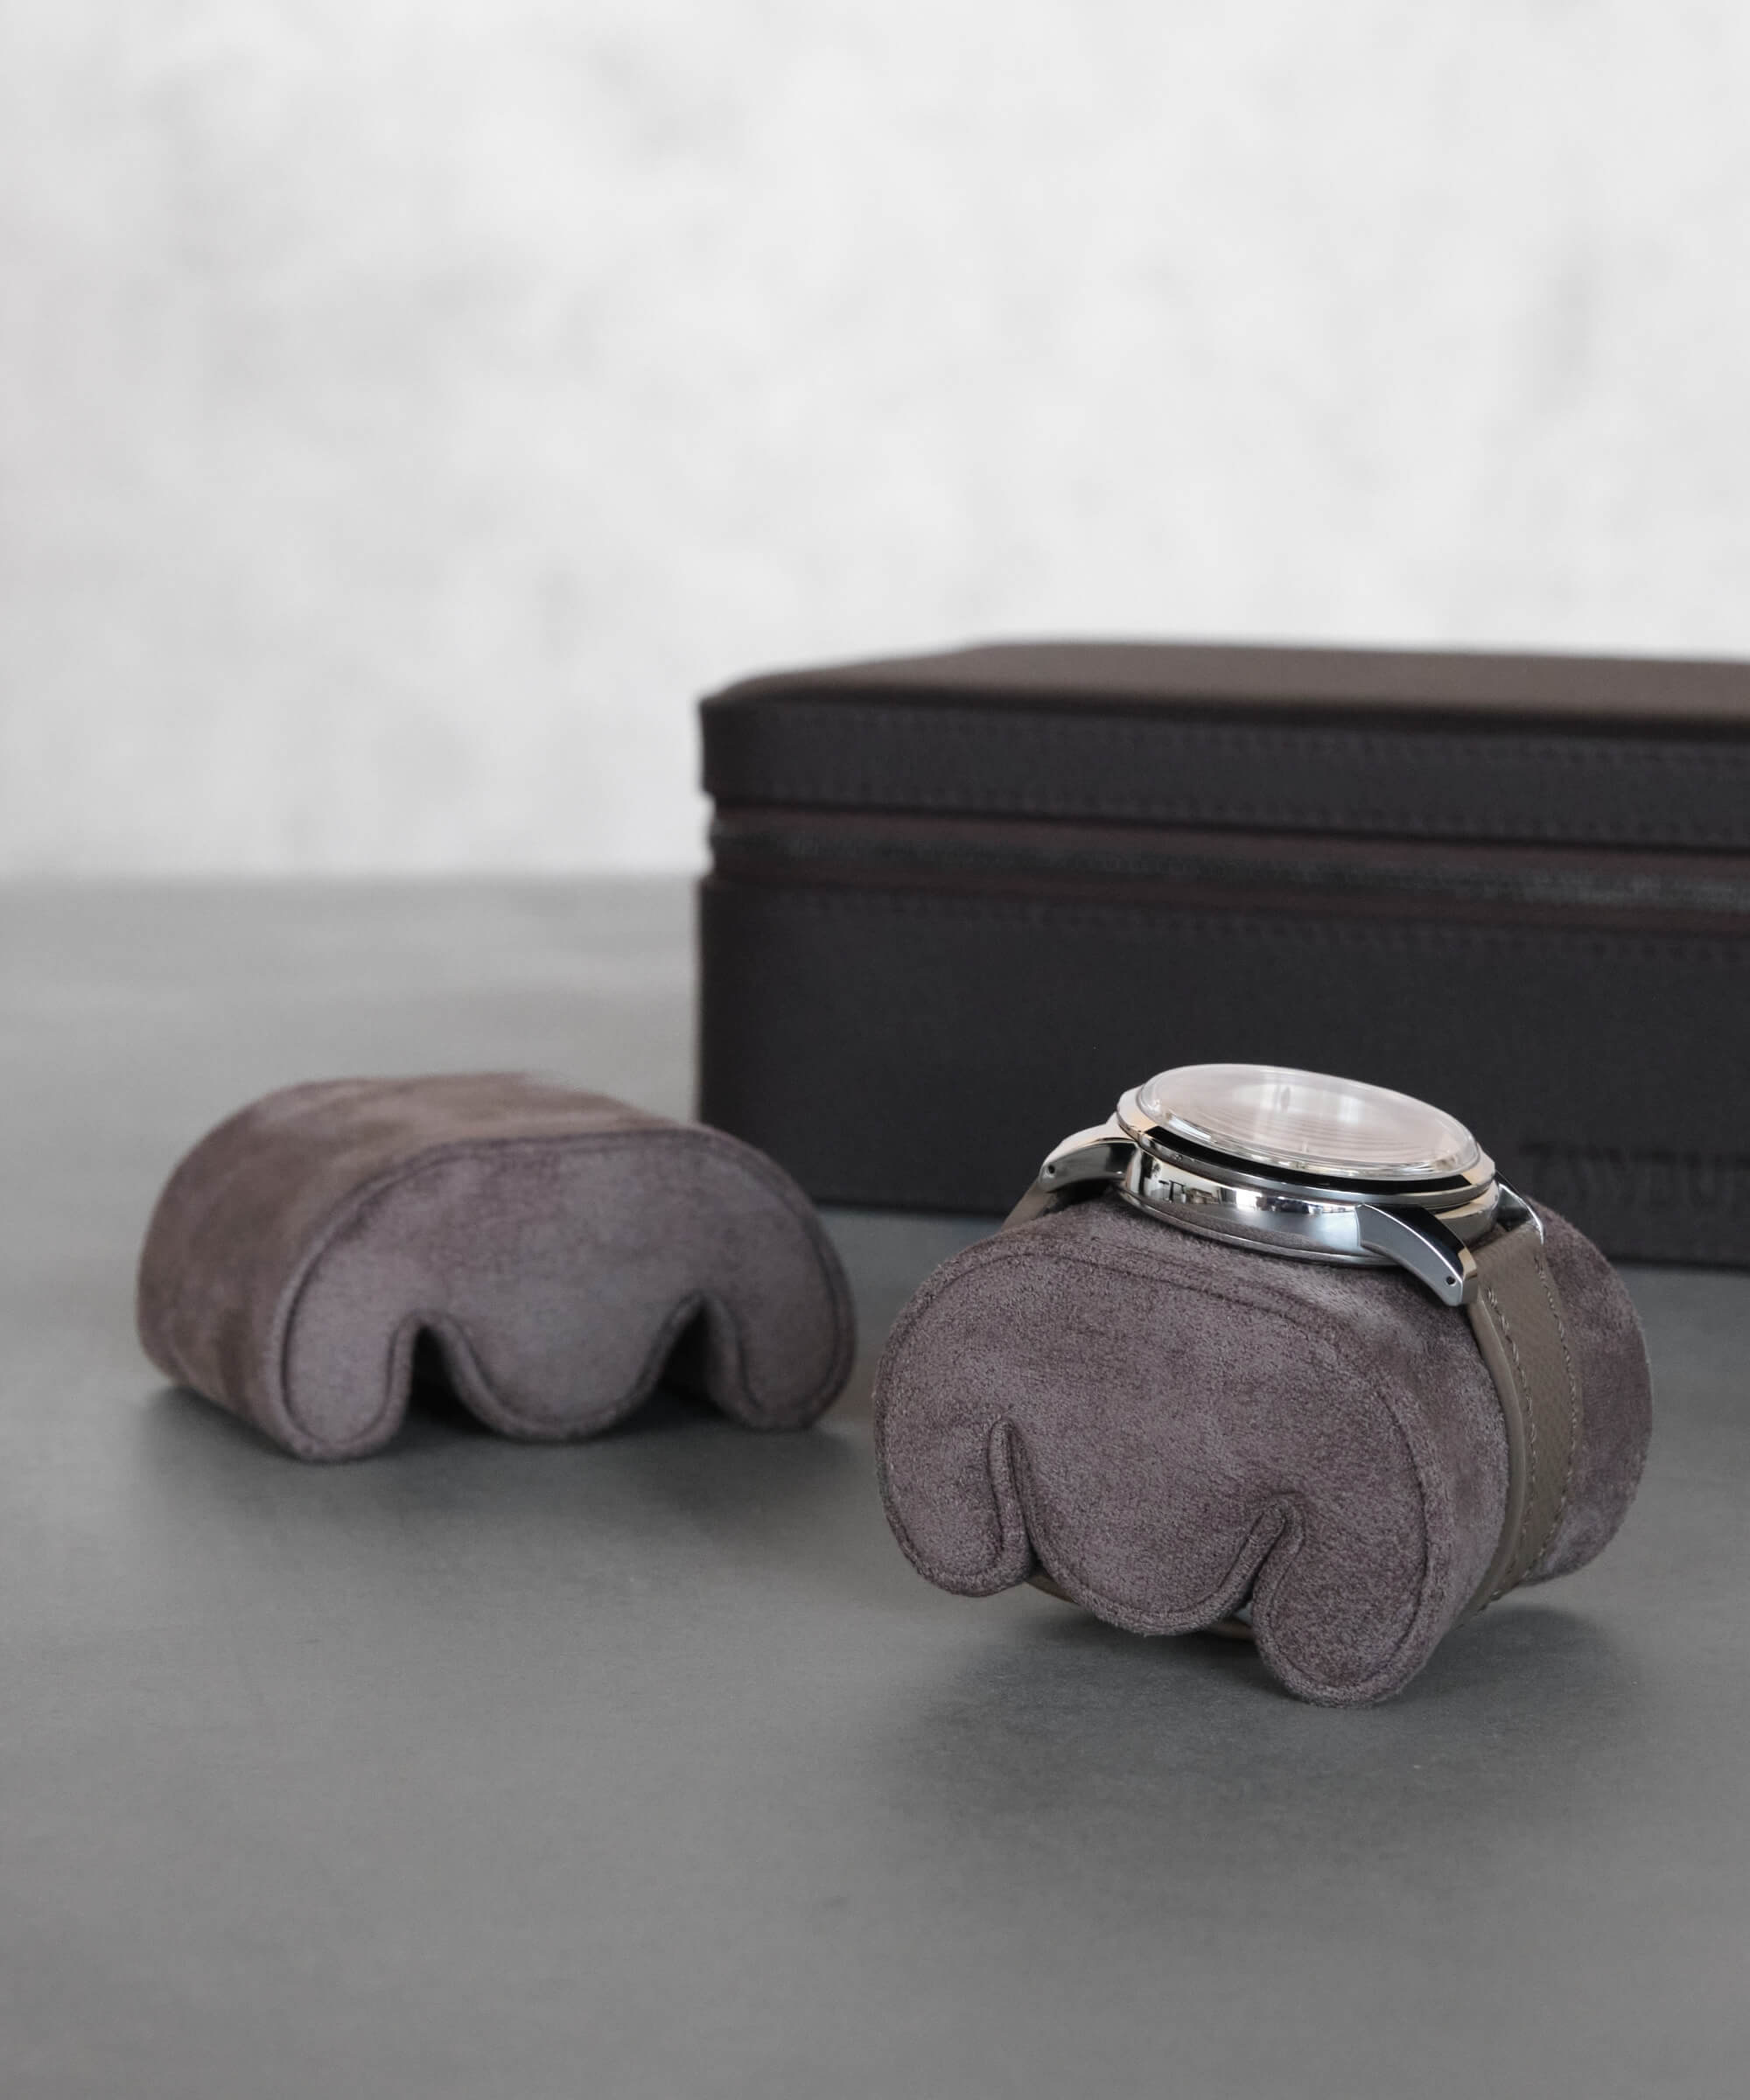 A Fraser 2 Watch Travel Case with Storage - Brown by TAWBURY providing protection for a watch-loving individual.